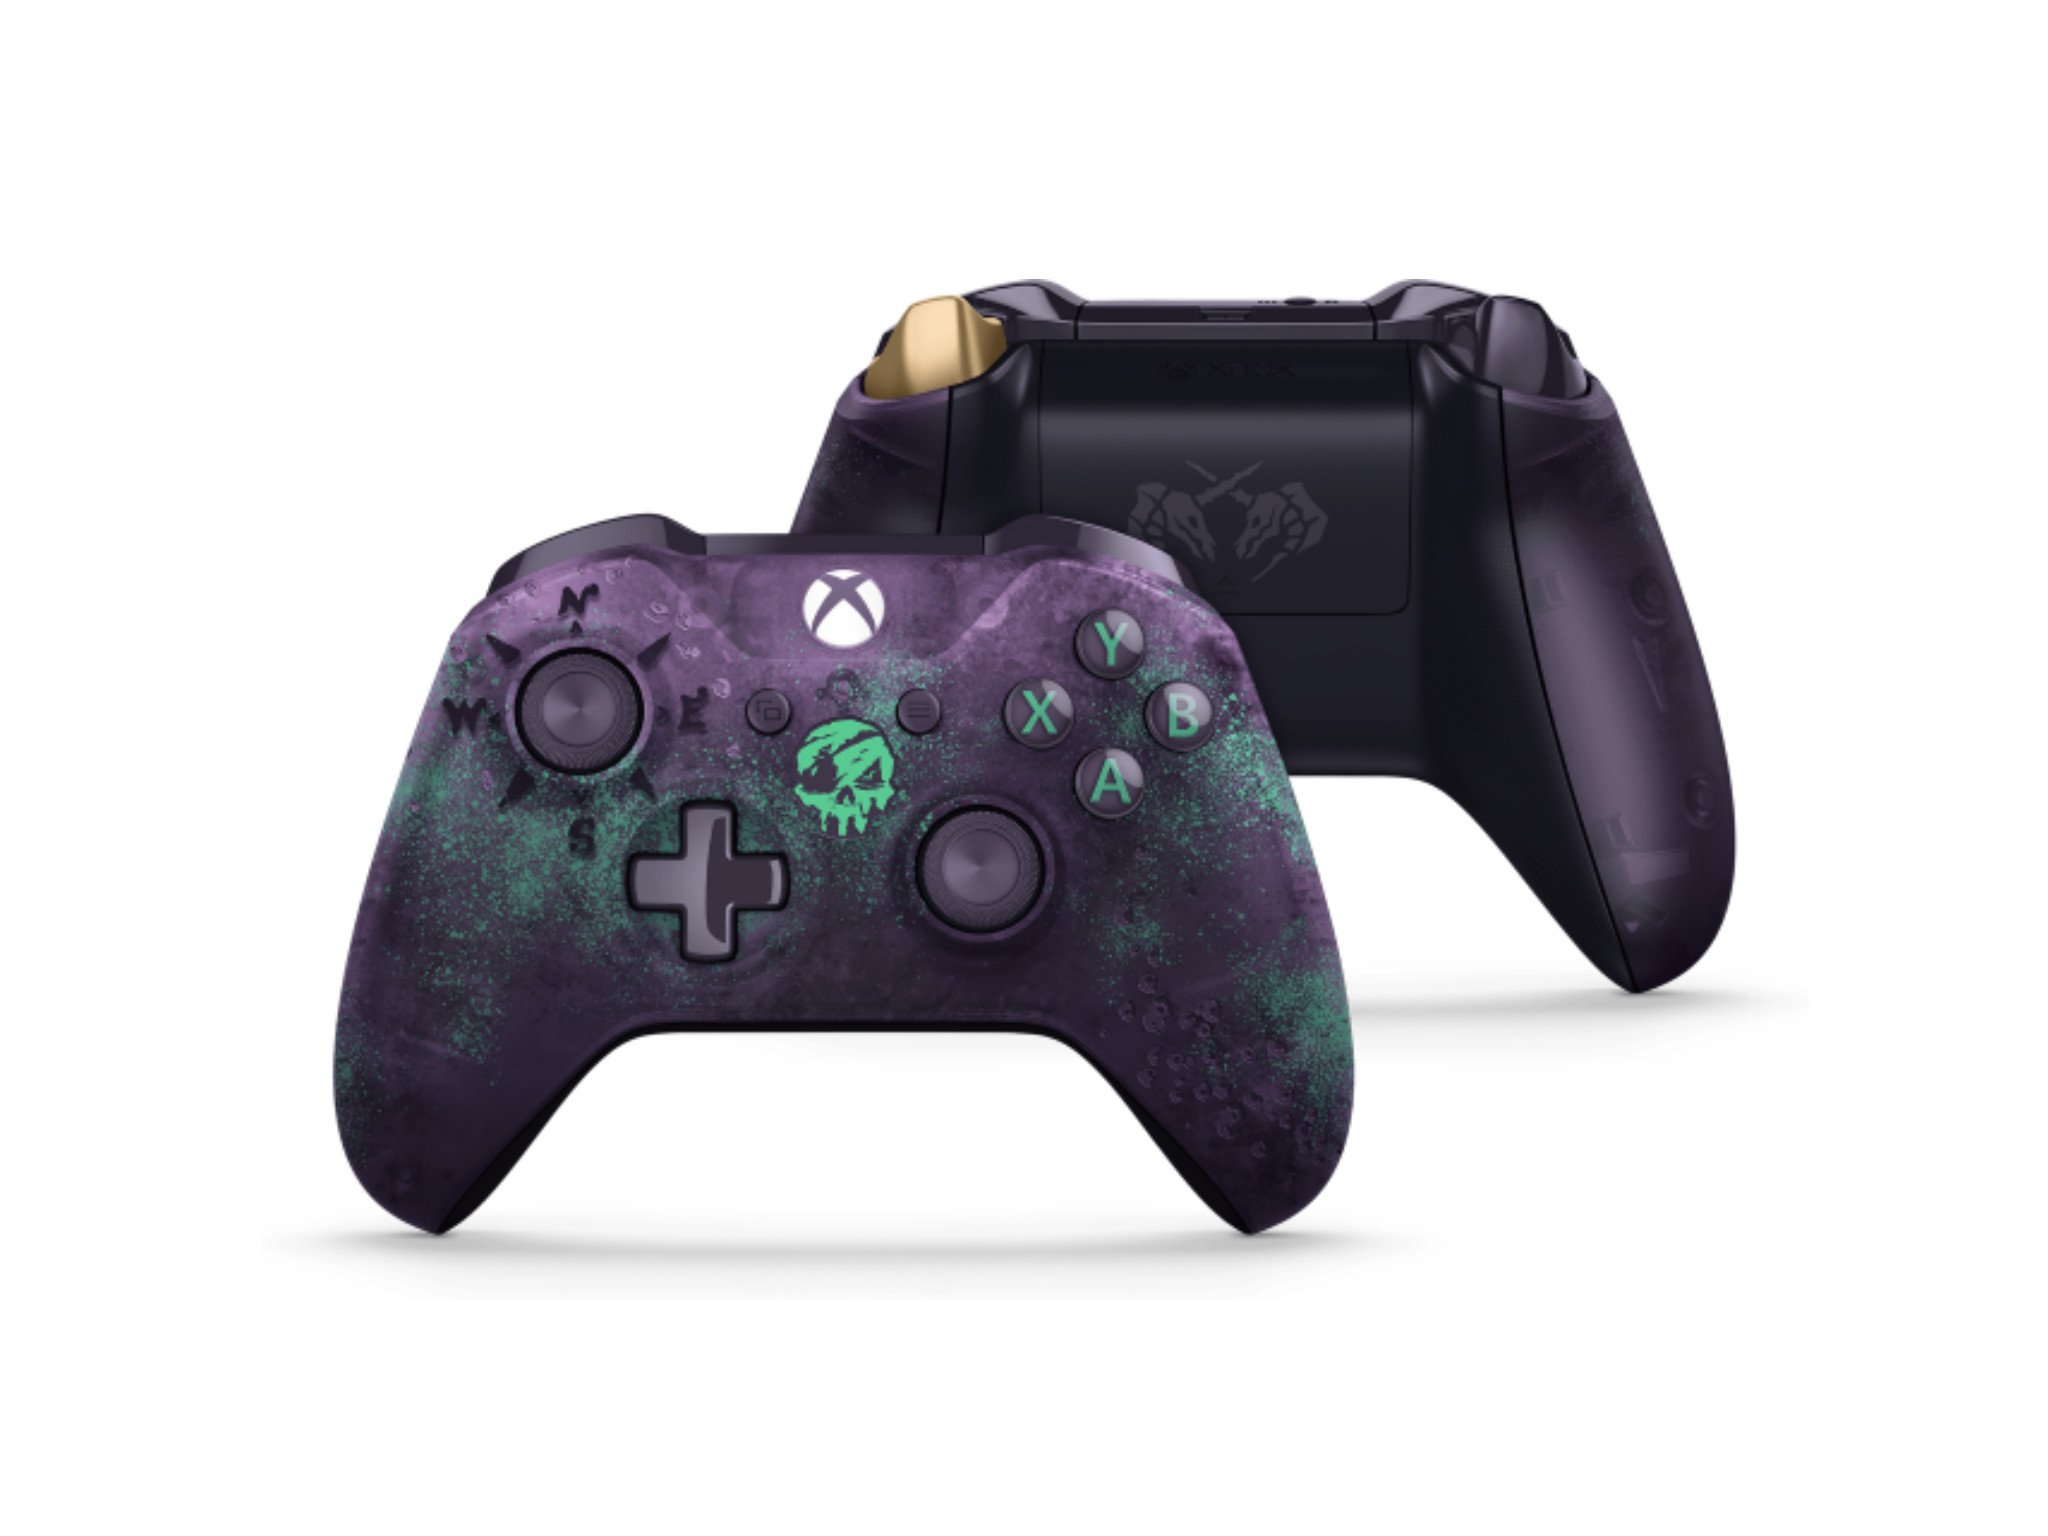 This spiffy Sea of Thieves controller will let you hit the high seas in style